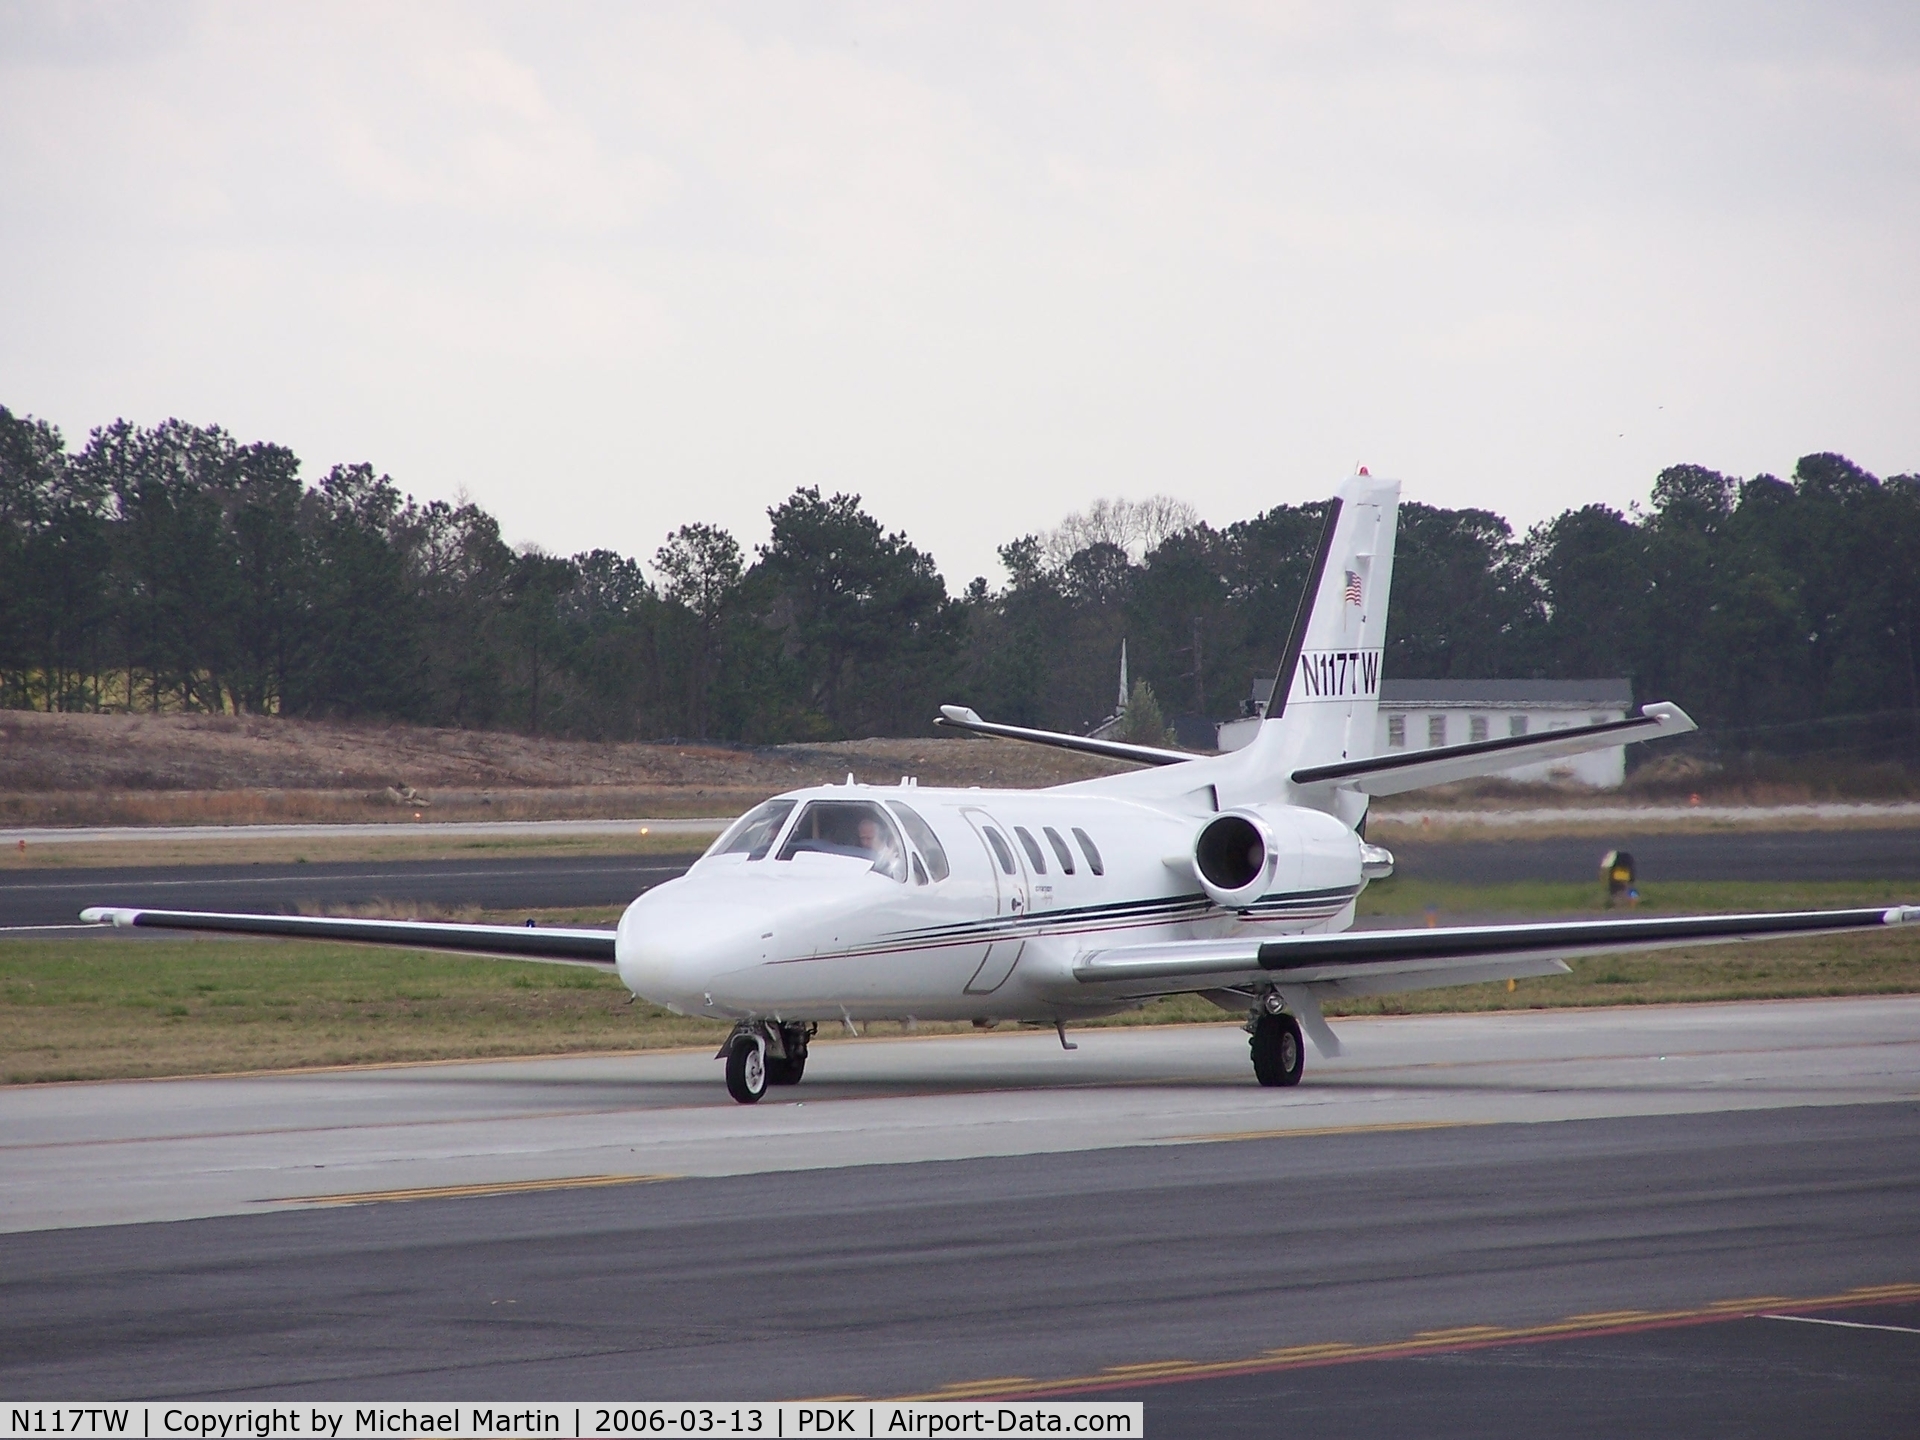 N117TW, 1972 Cessna 500 Citation I C/N 500-0059, Taxing from Mercury Air Service